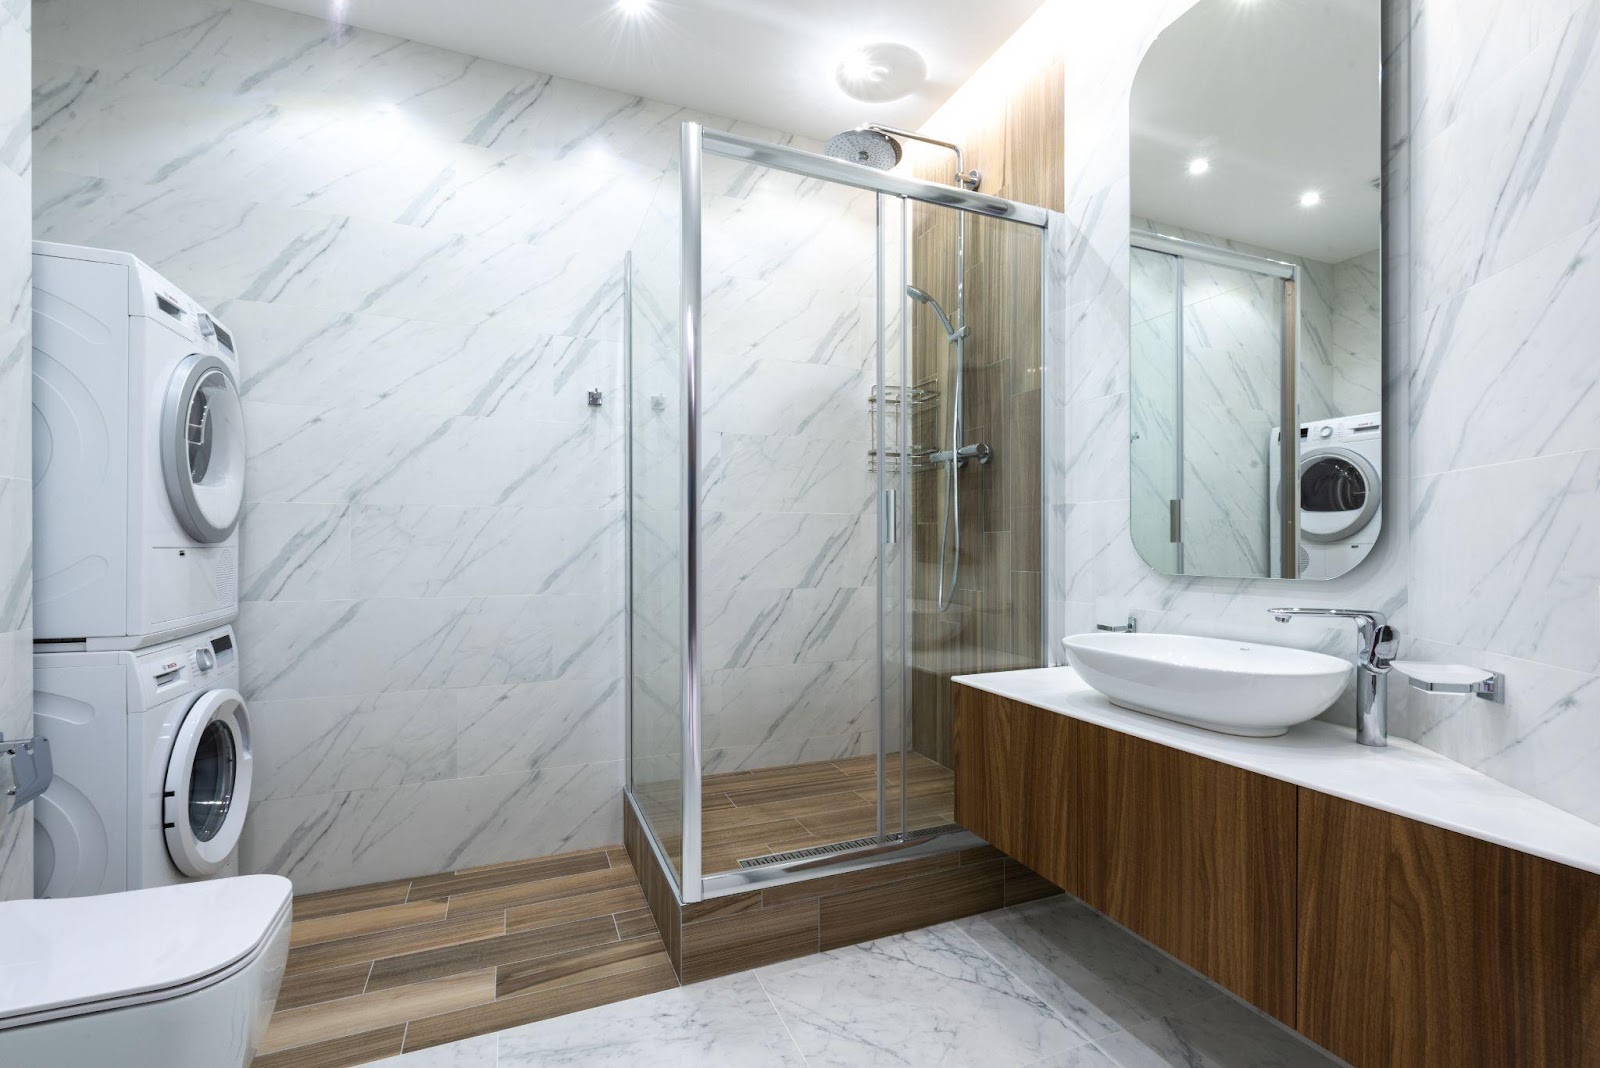 How to select modern tiles for your bathroom – high-end fixes and customised solutions which would tremendously transform your interior?